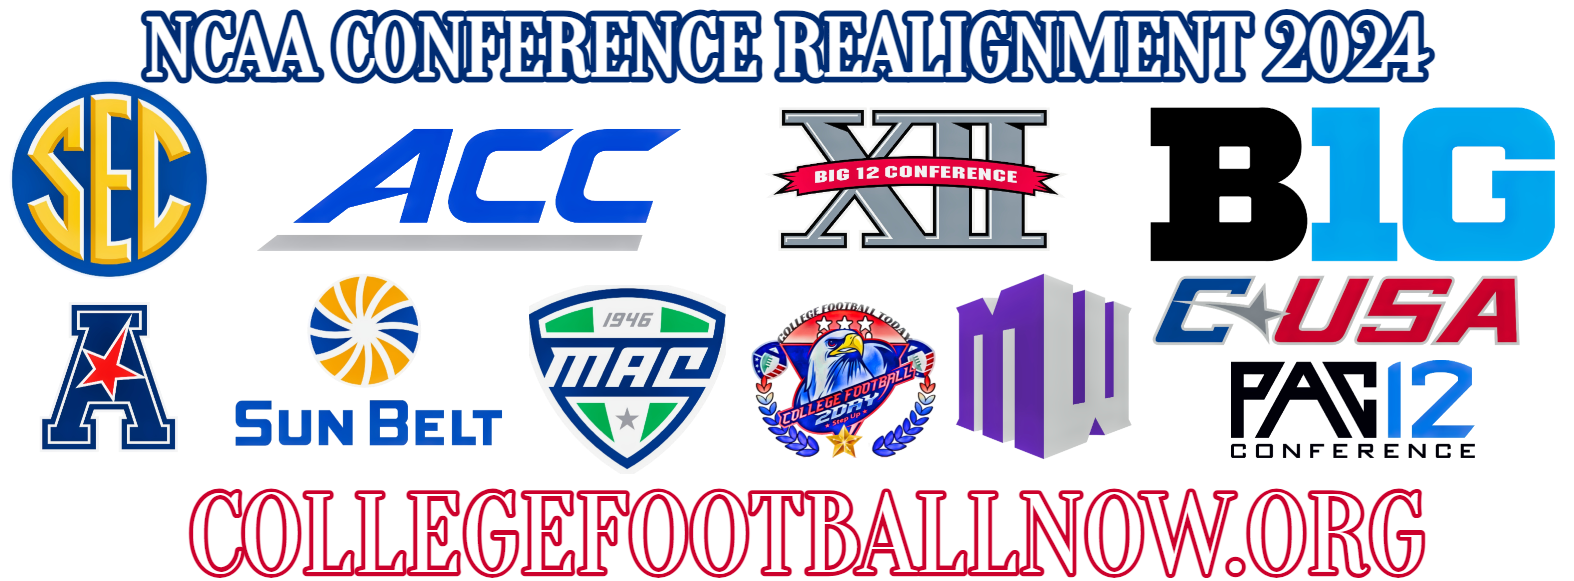 2024 cfb conference realignment, cfb conferences 2024, 2024-2024 cfb bowl game apparel, 2024-2024 cfb bowl game schedule, cfb playoff top 25 rankings, cfb top 25 rankings